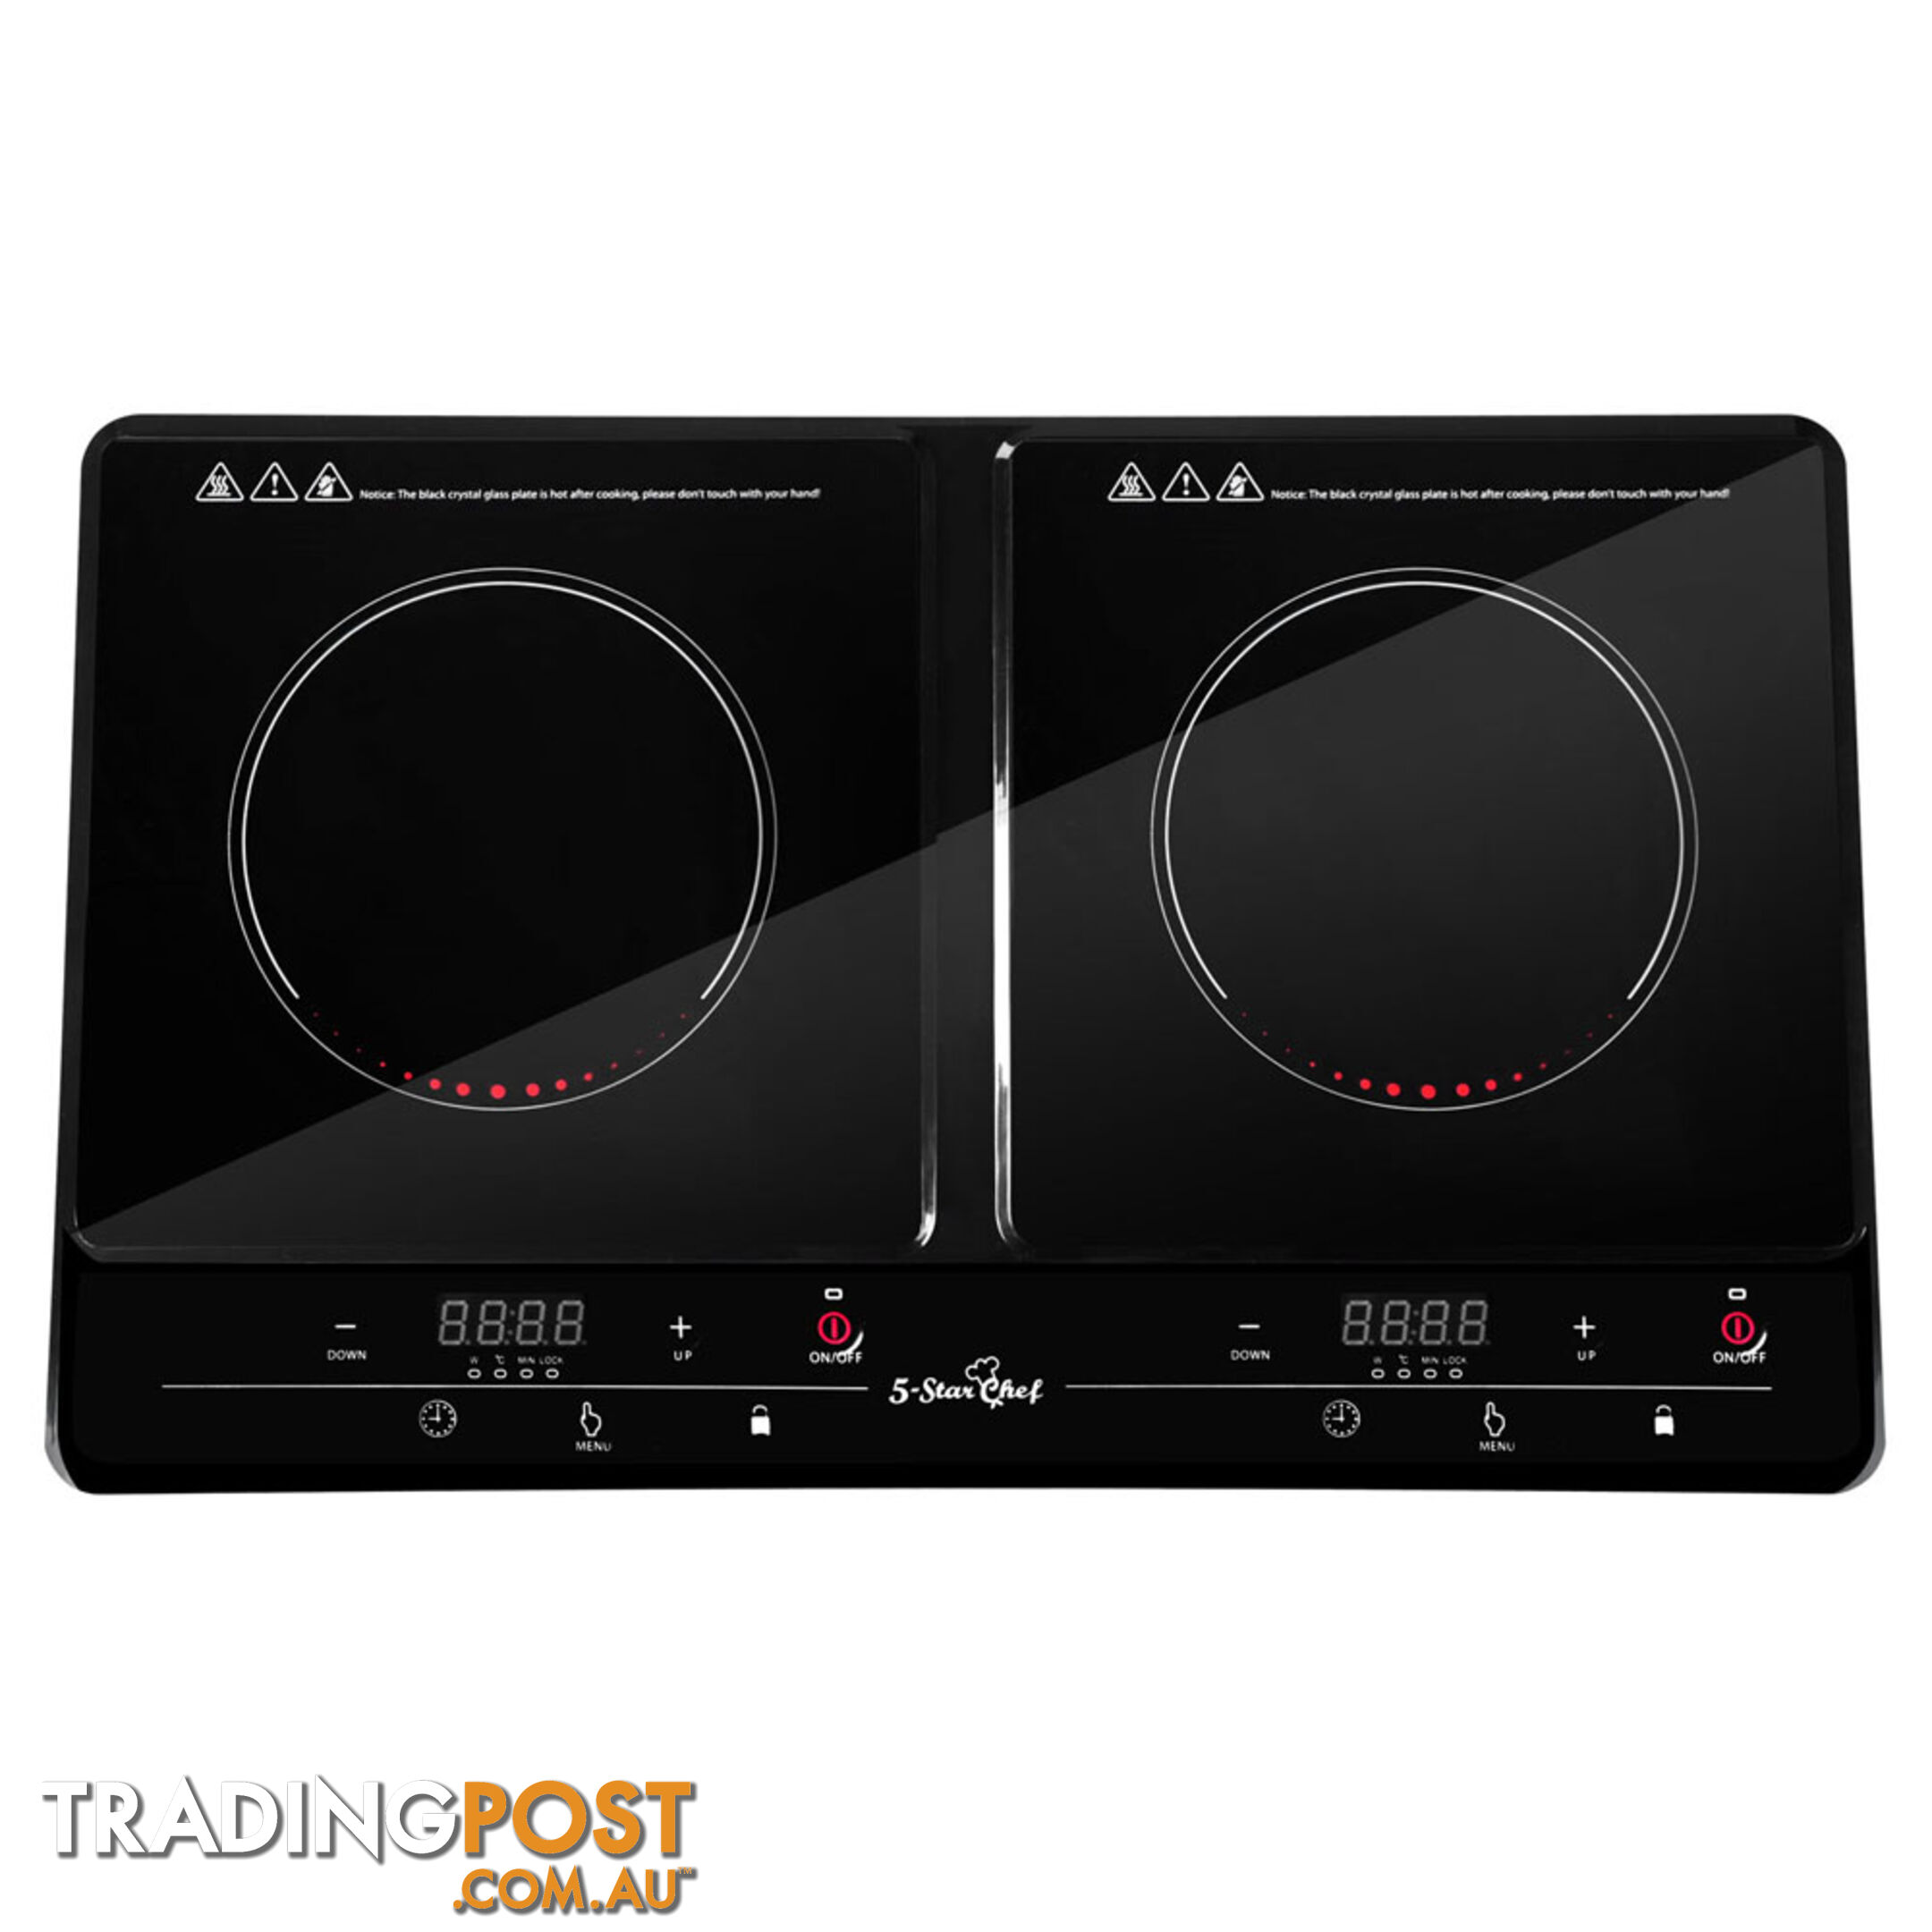 Portable Electric Induction Cooktop Kitchen Stove Ceramic Hot Plate Double